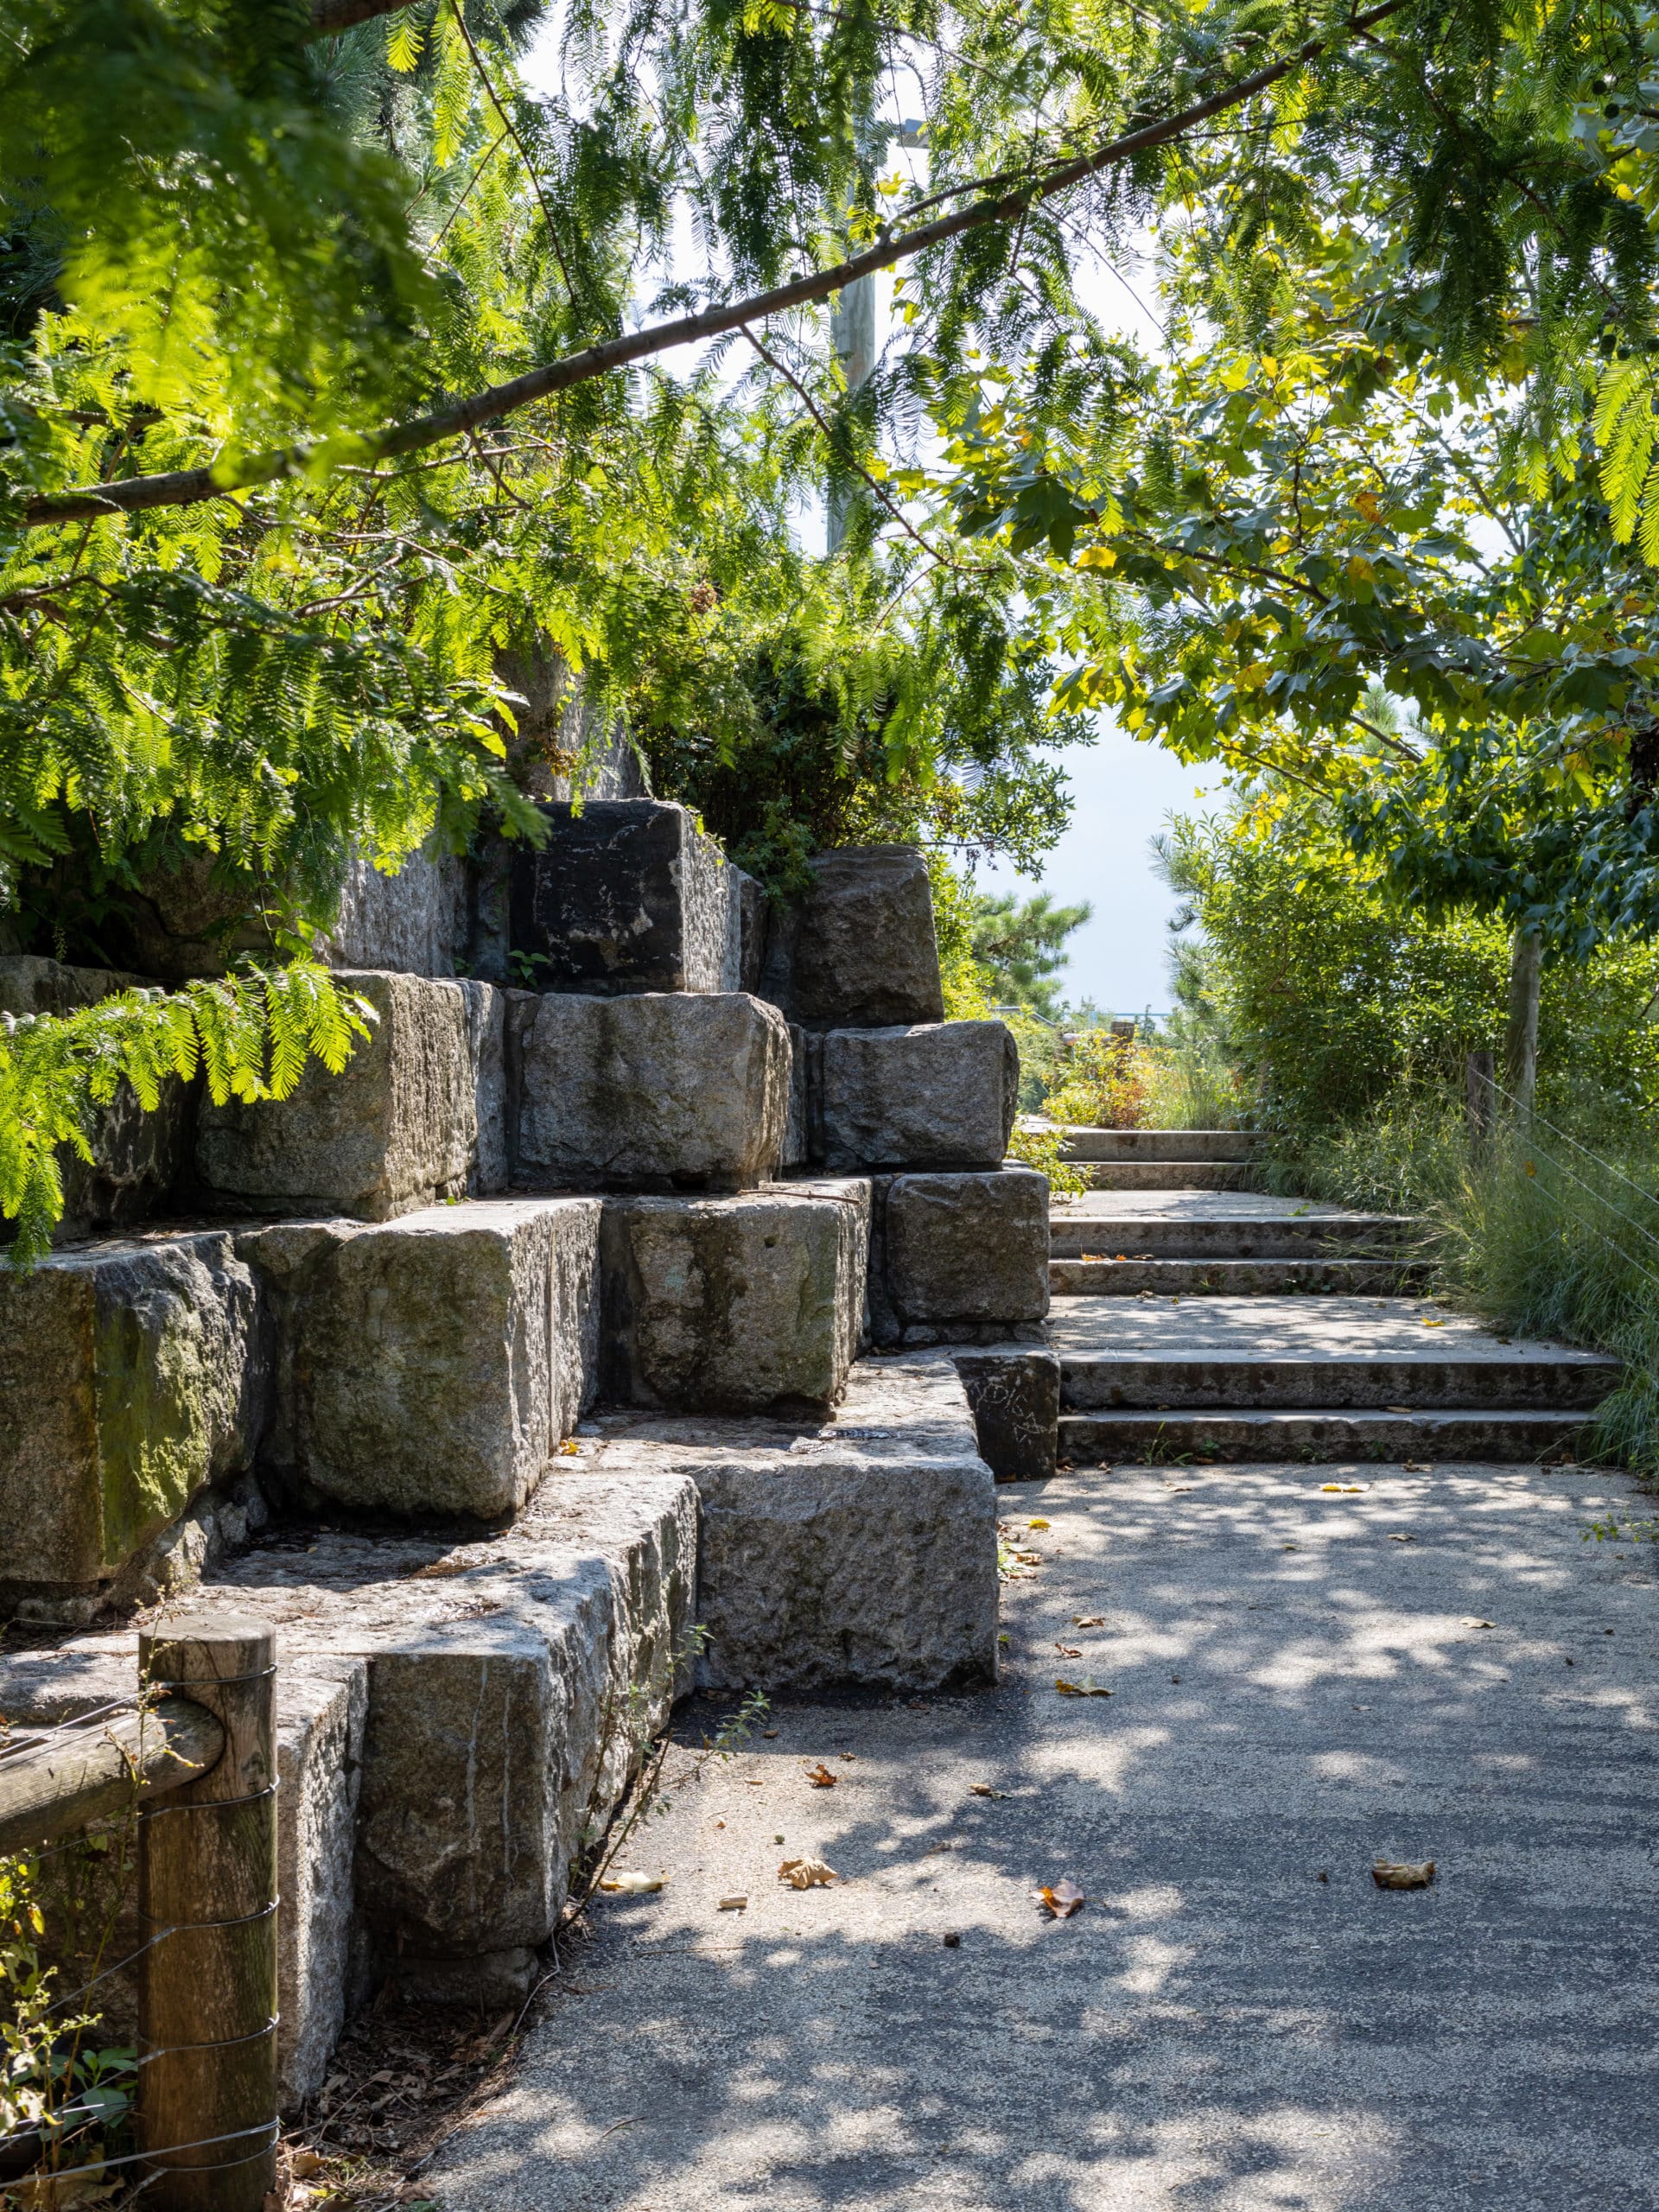 Stack of square granite blocks along a tree-lined pathway on a sunny day.